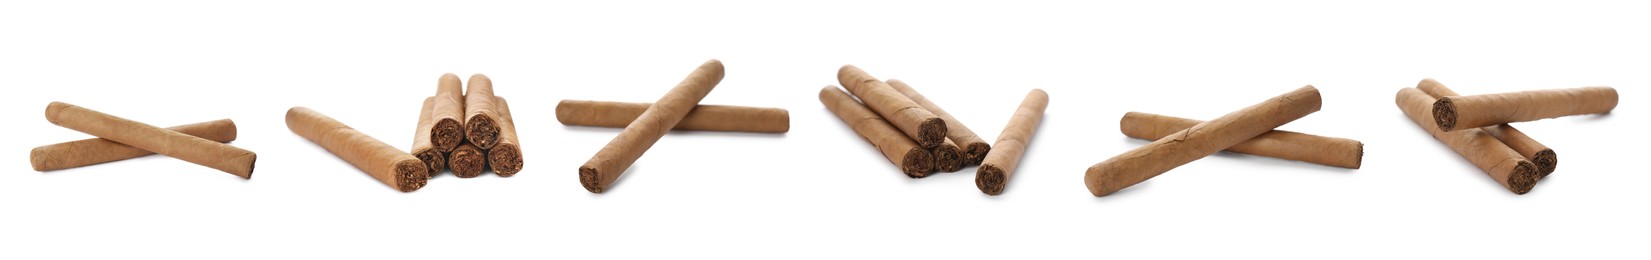 Set of cigars wrapped in tobacco leaves on white background. Banner design